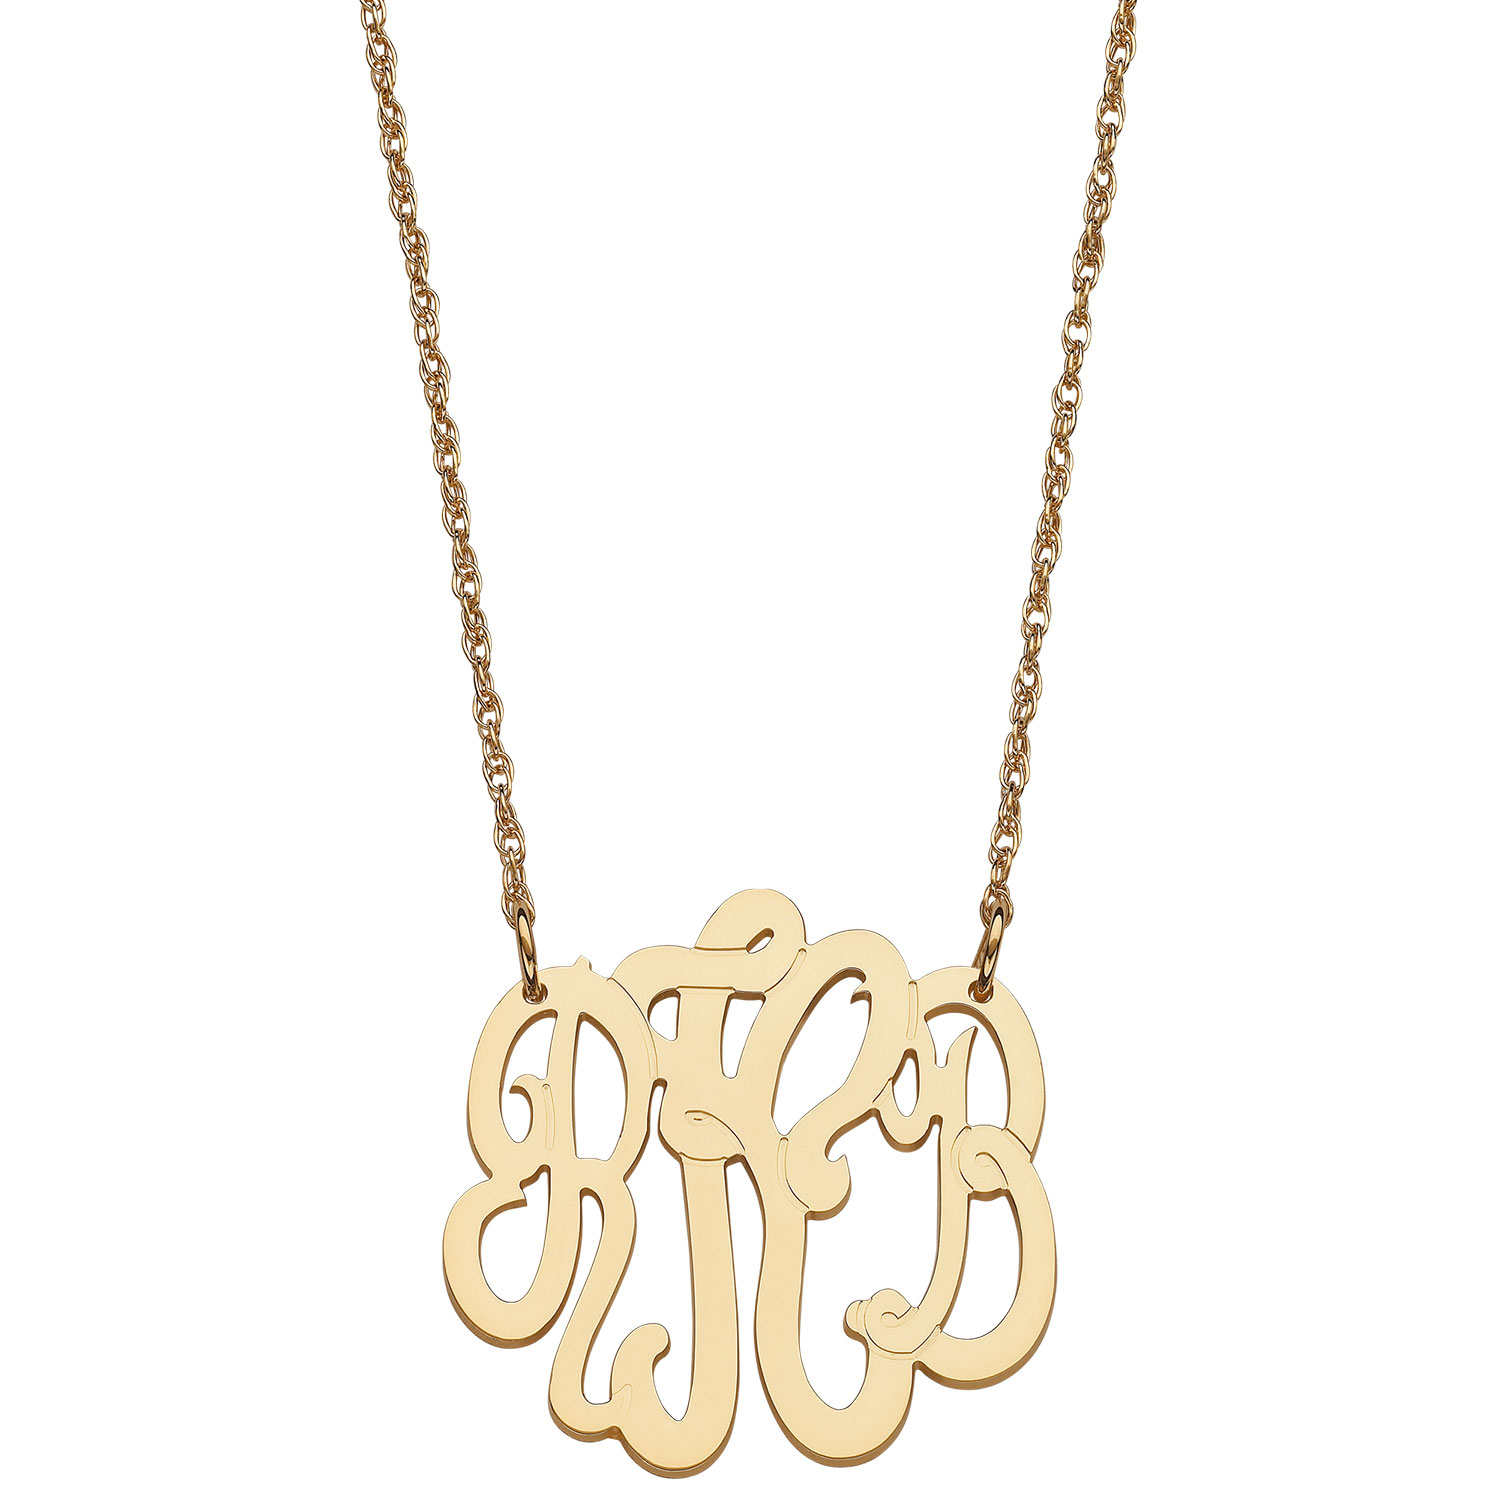 10K Yellow Gold 3 Initial Monogram Necklace Small